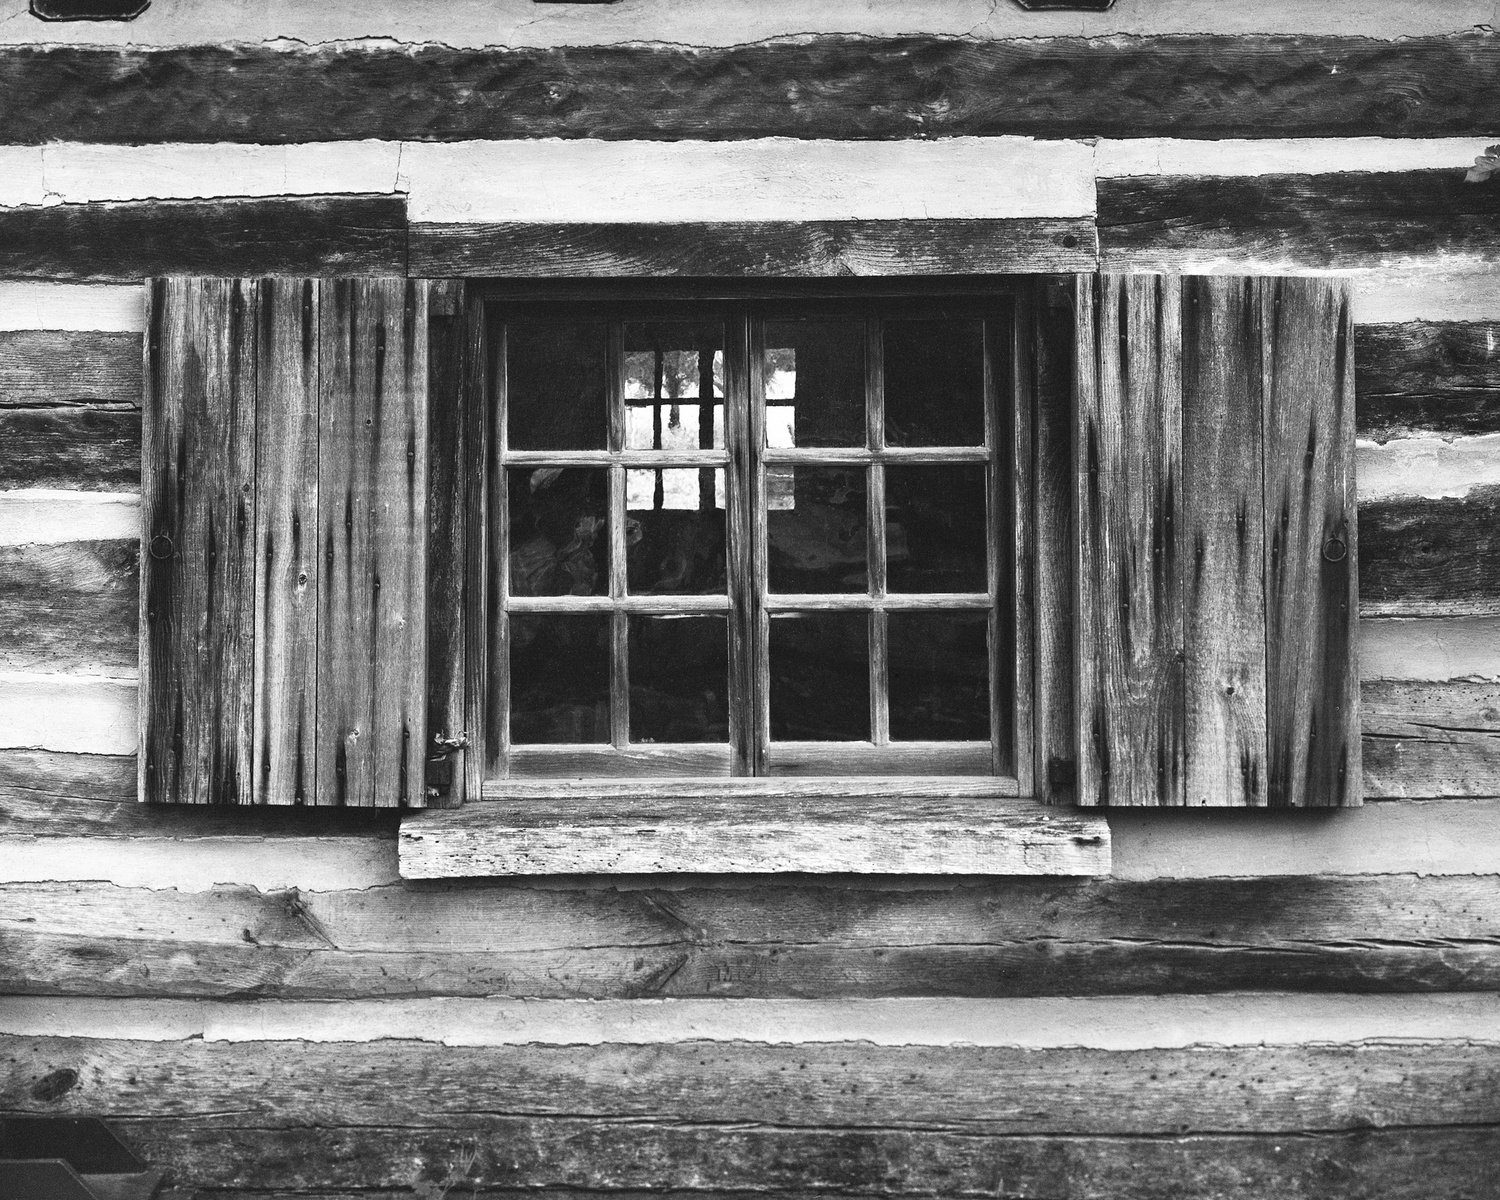 4x5_for_365_project_0171_Landis_Valley_window.png